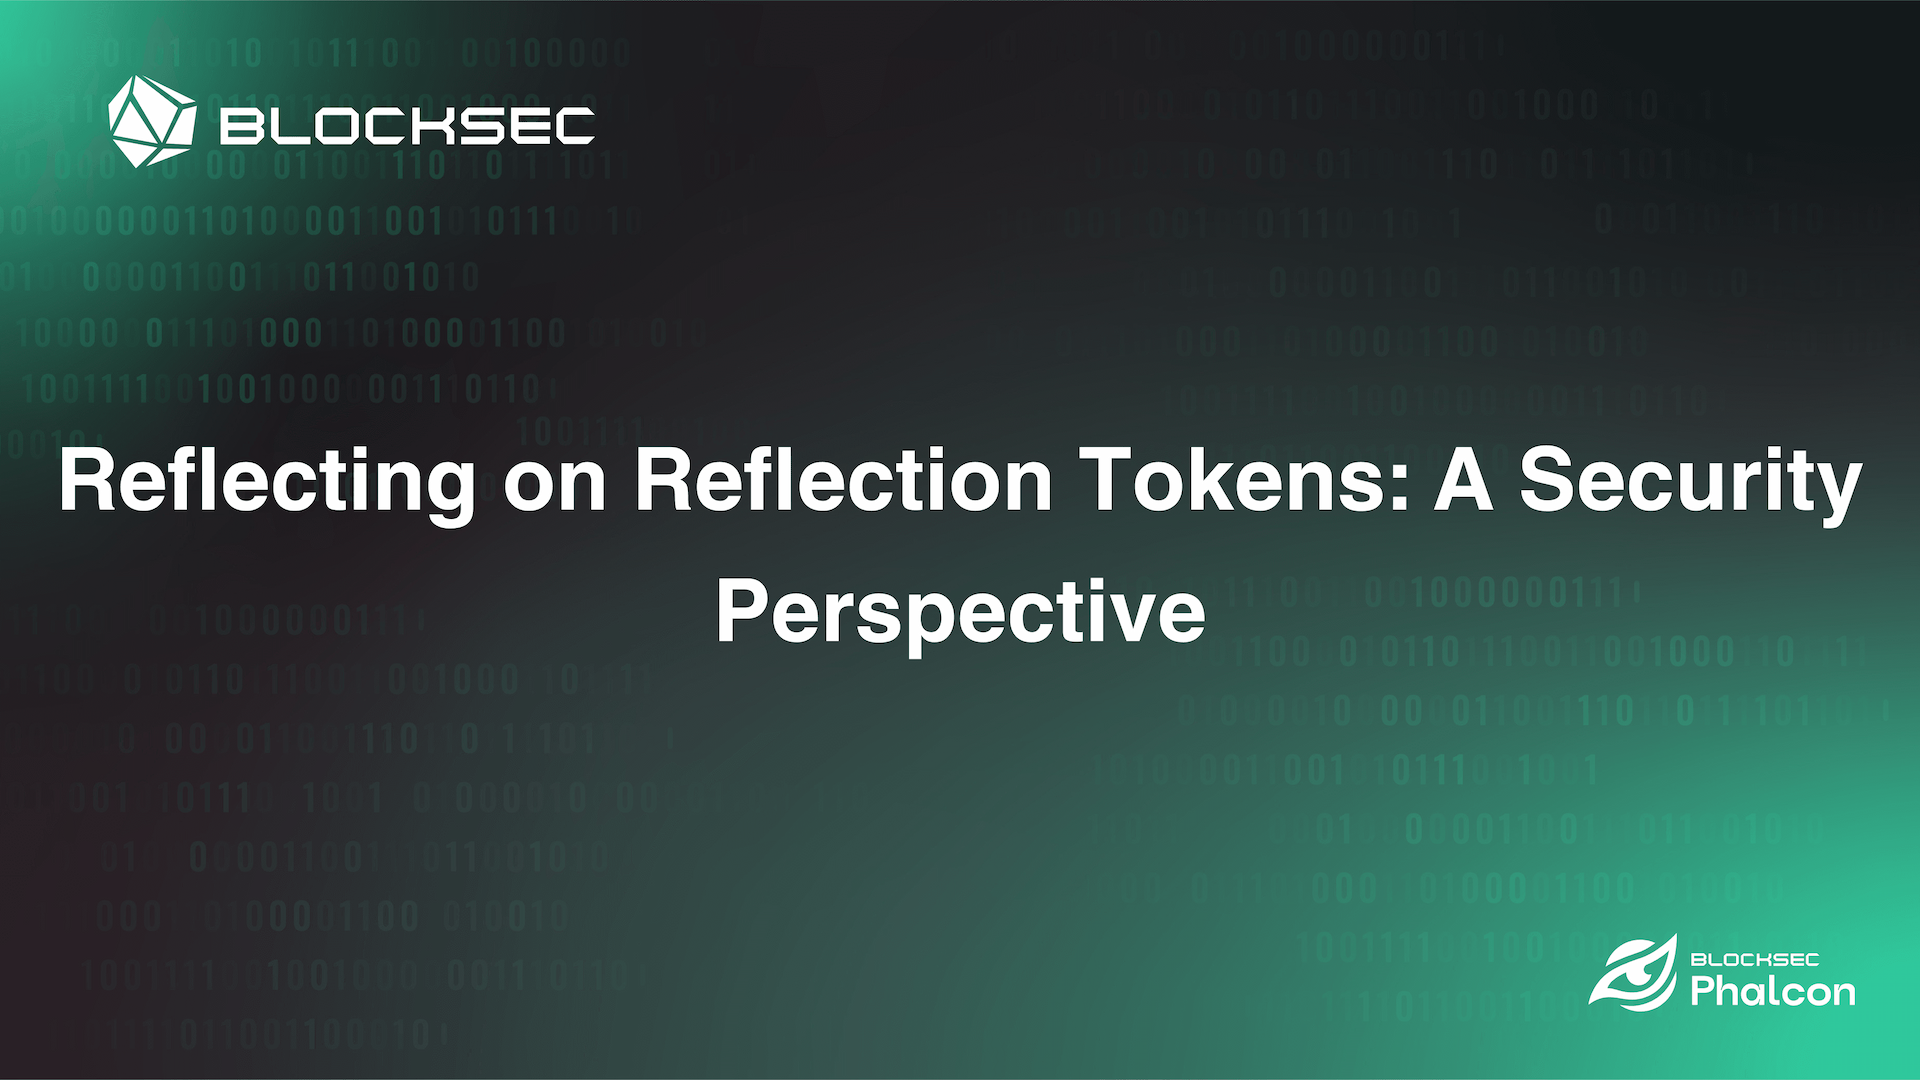 Reflecting on Reflection Tokens: A Security Perspective